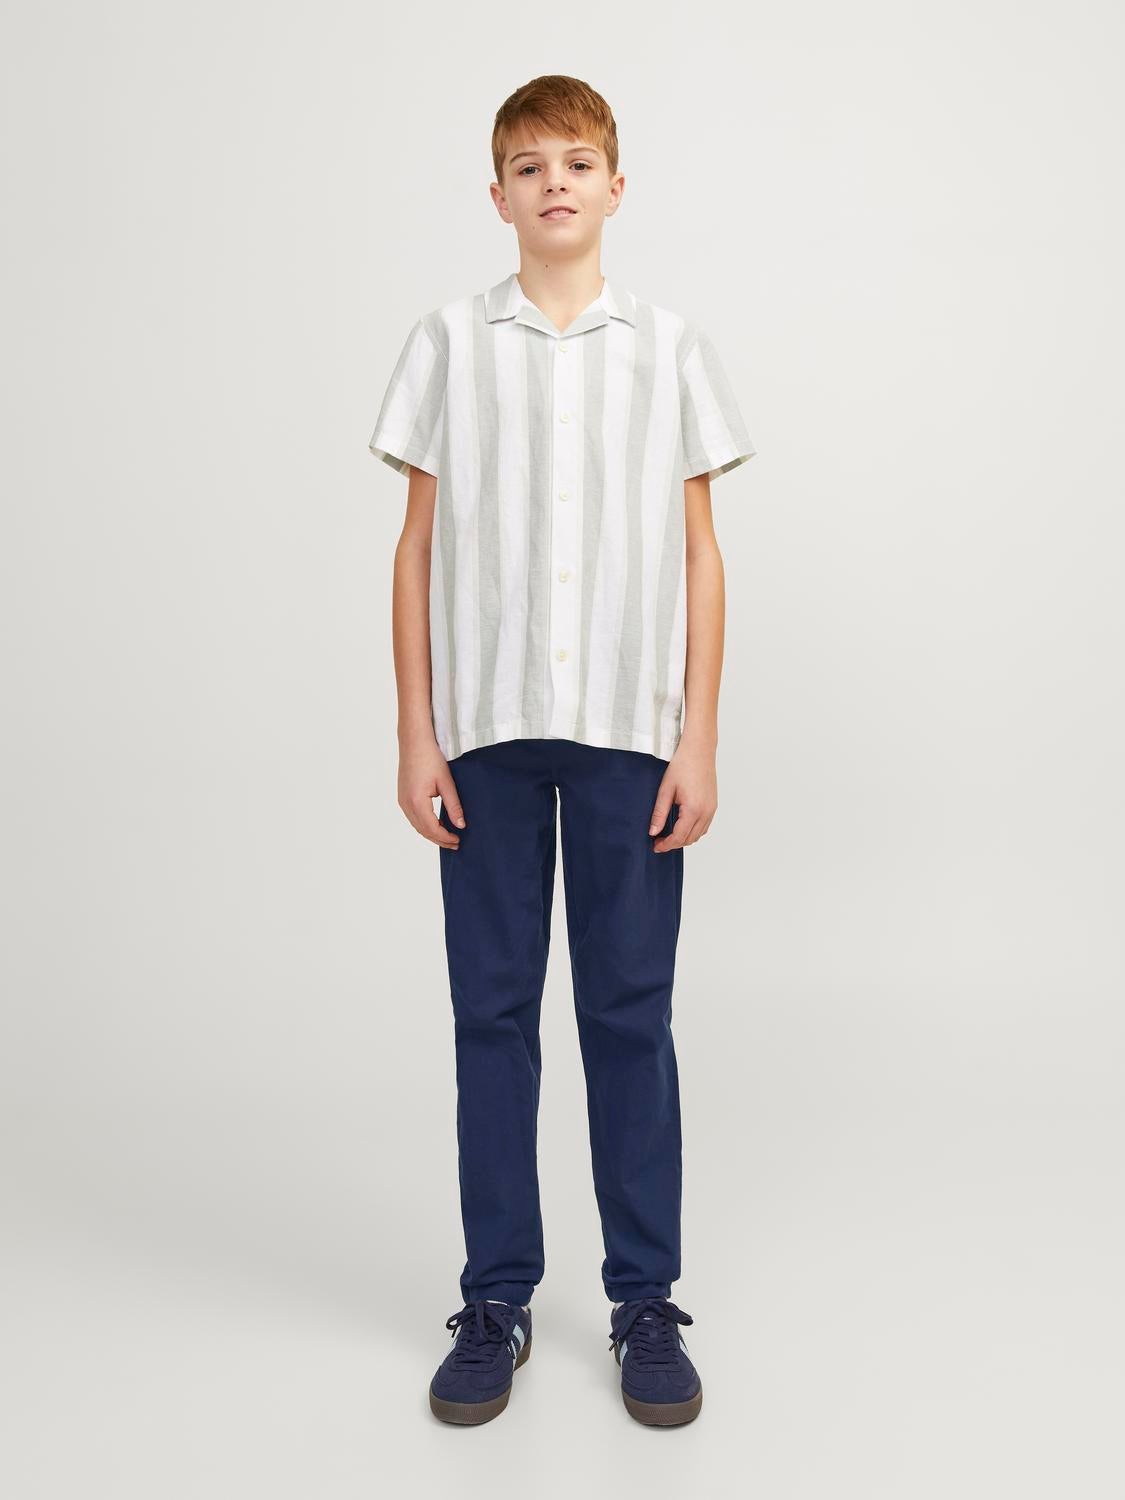 Classic trousers For boys